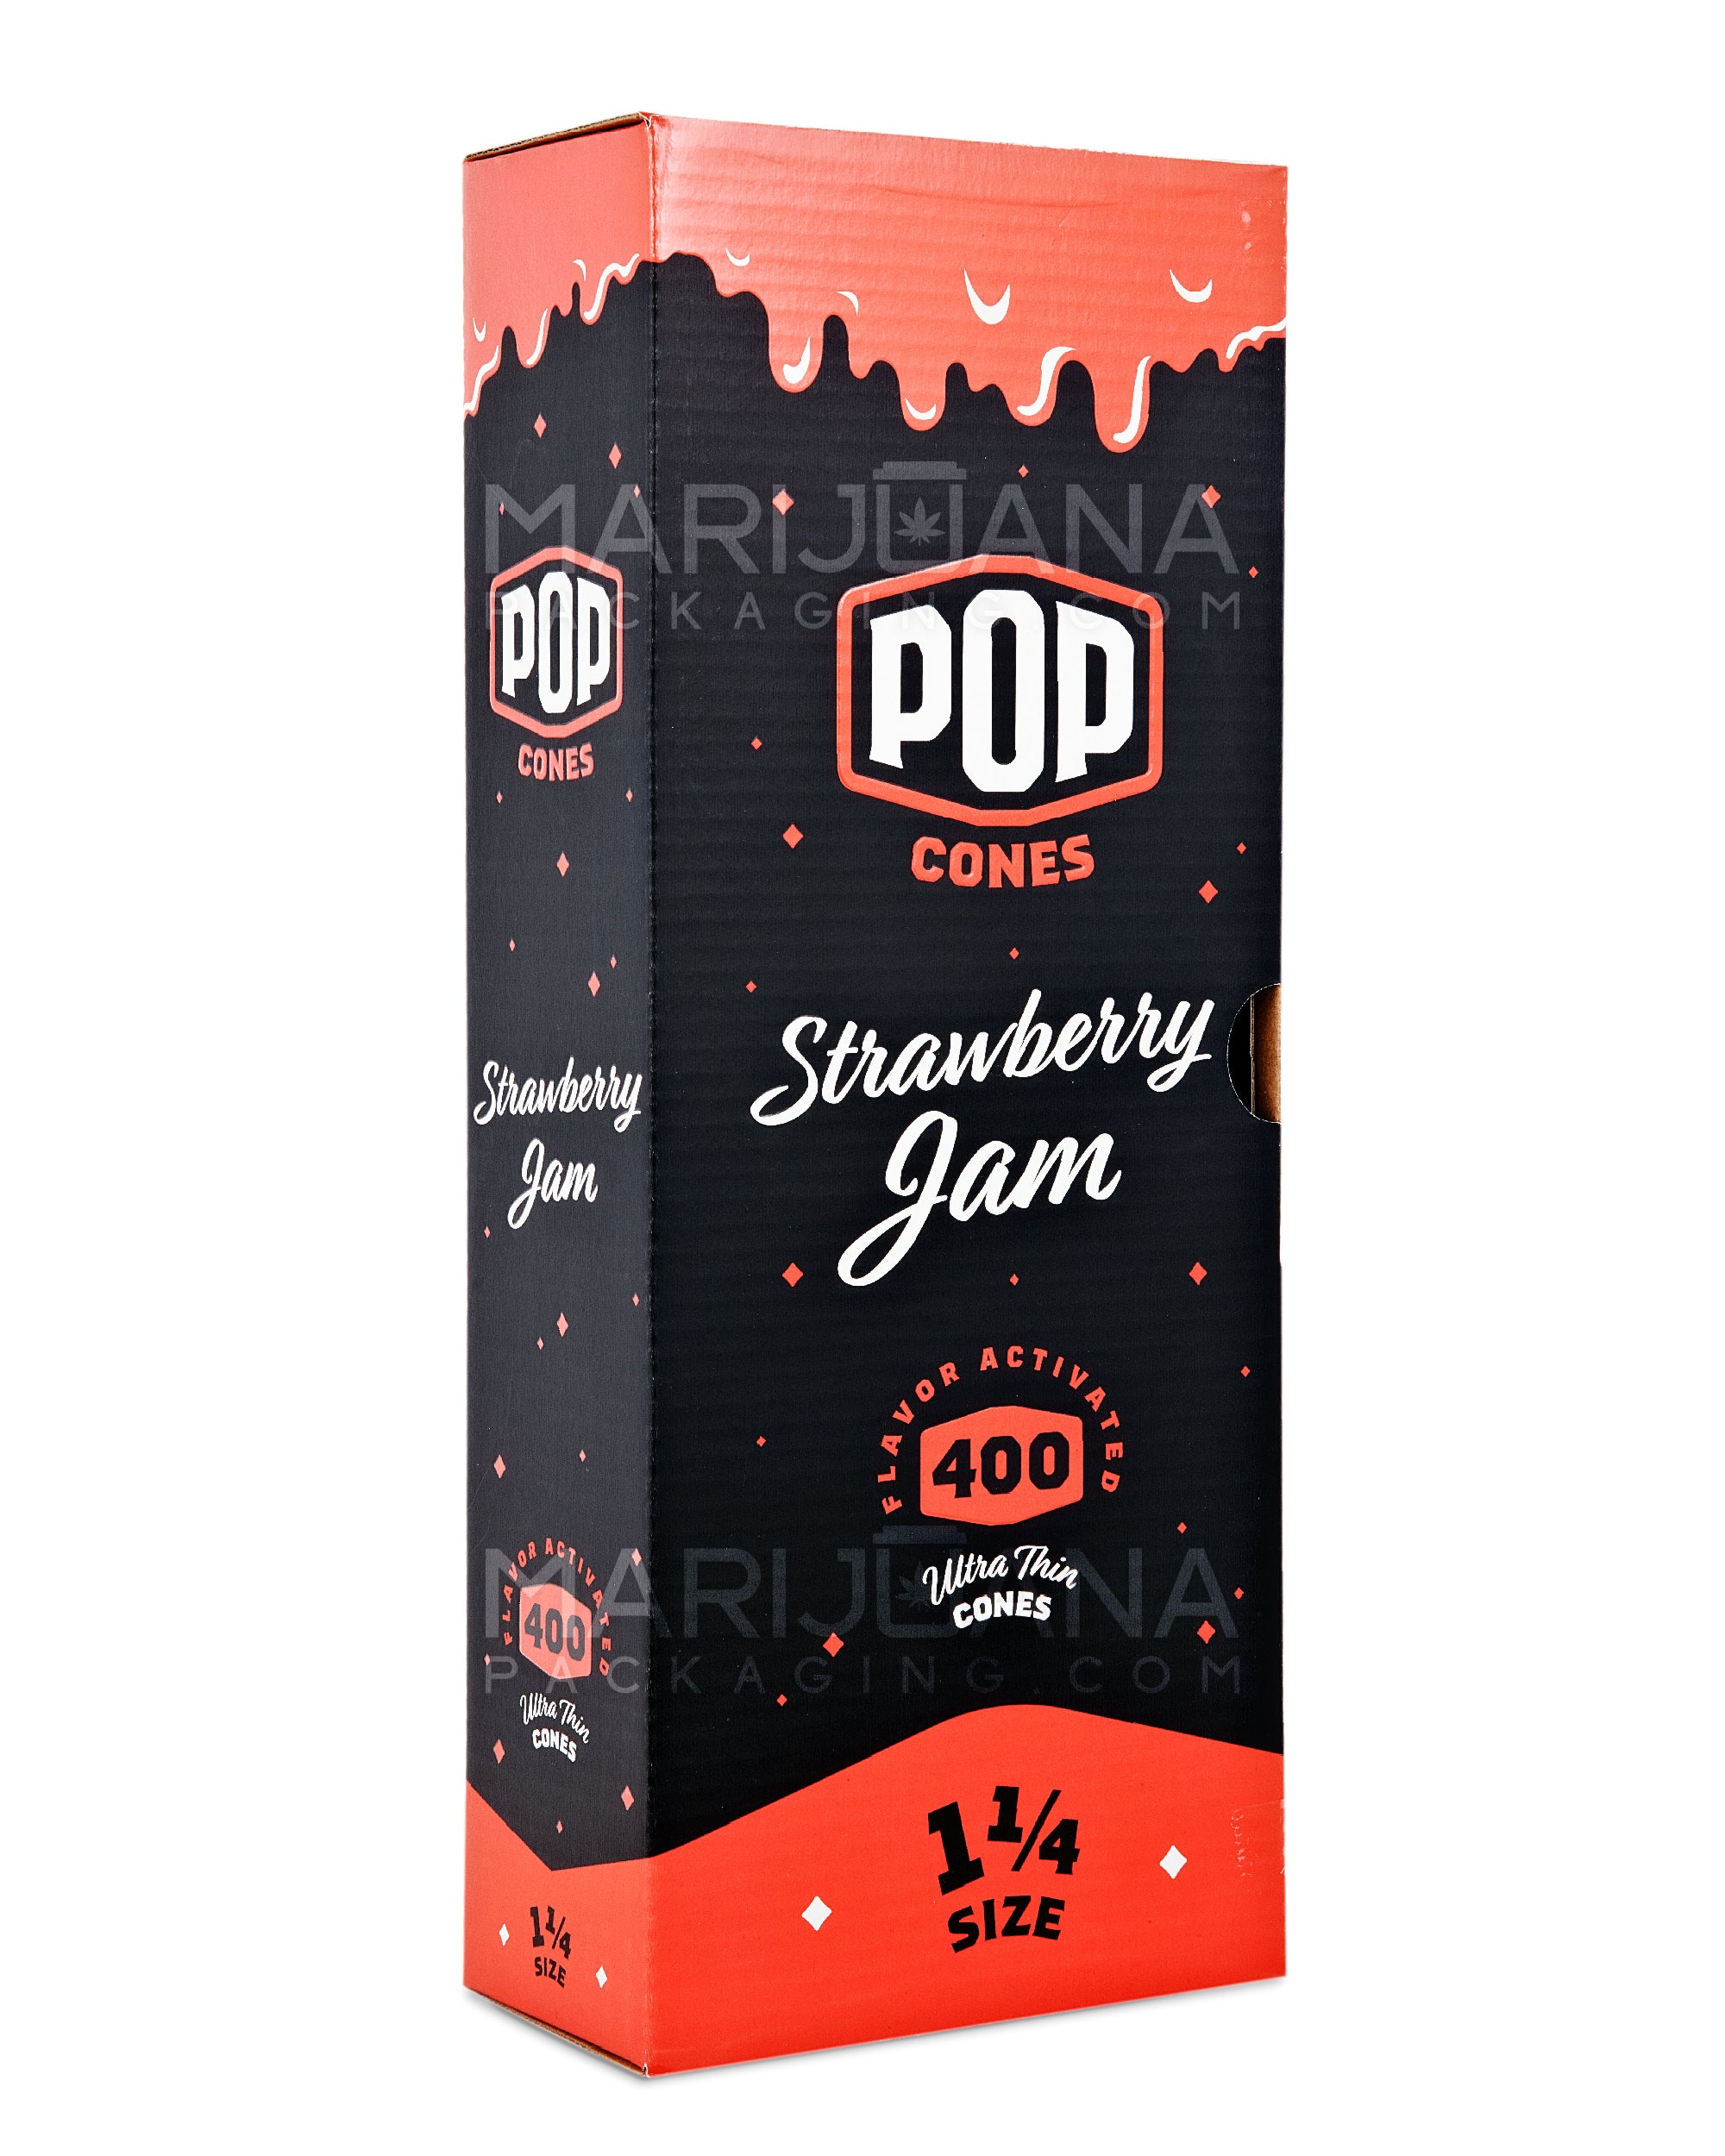 POP CONES | 1 1/4 Size Unbleached Pre-Rolled Cones | 84mm - Strawberry Jam - 400 Count - 1